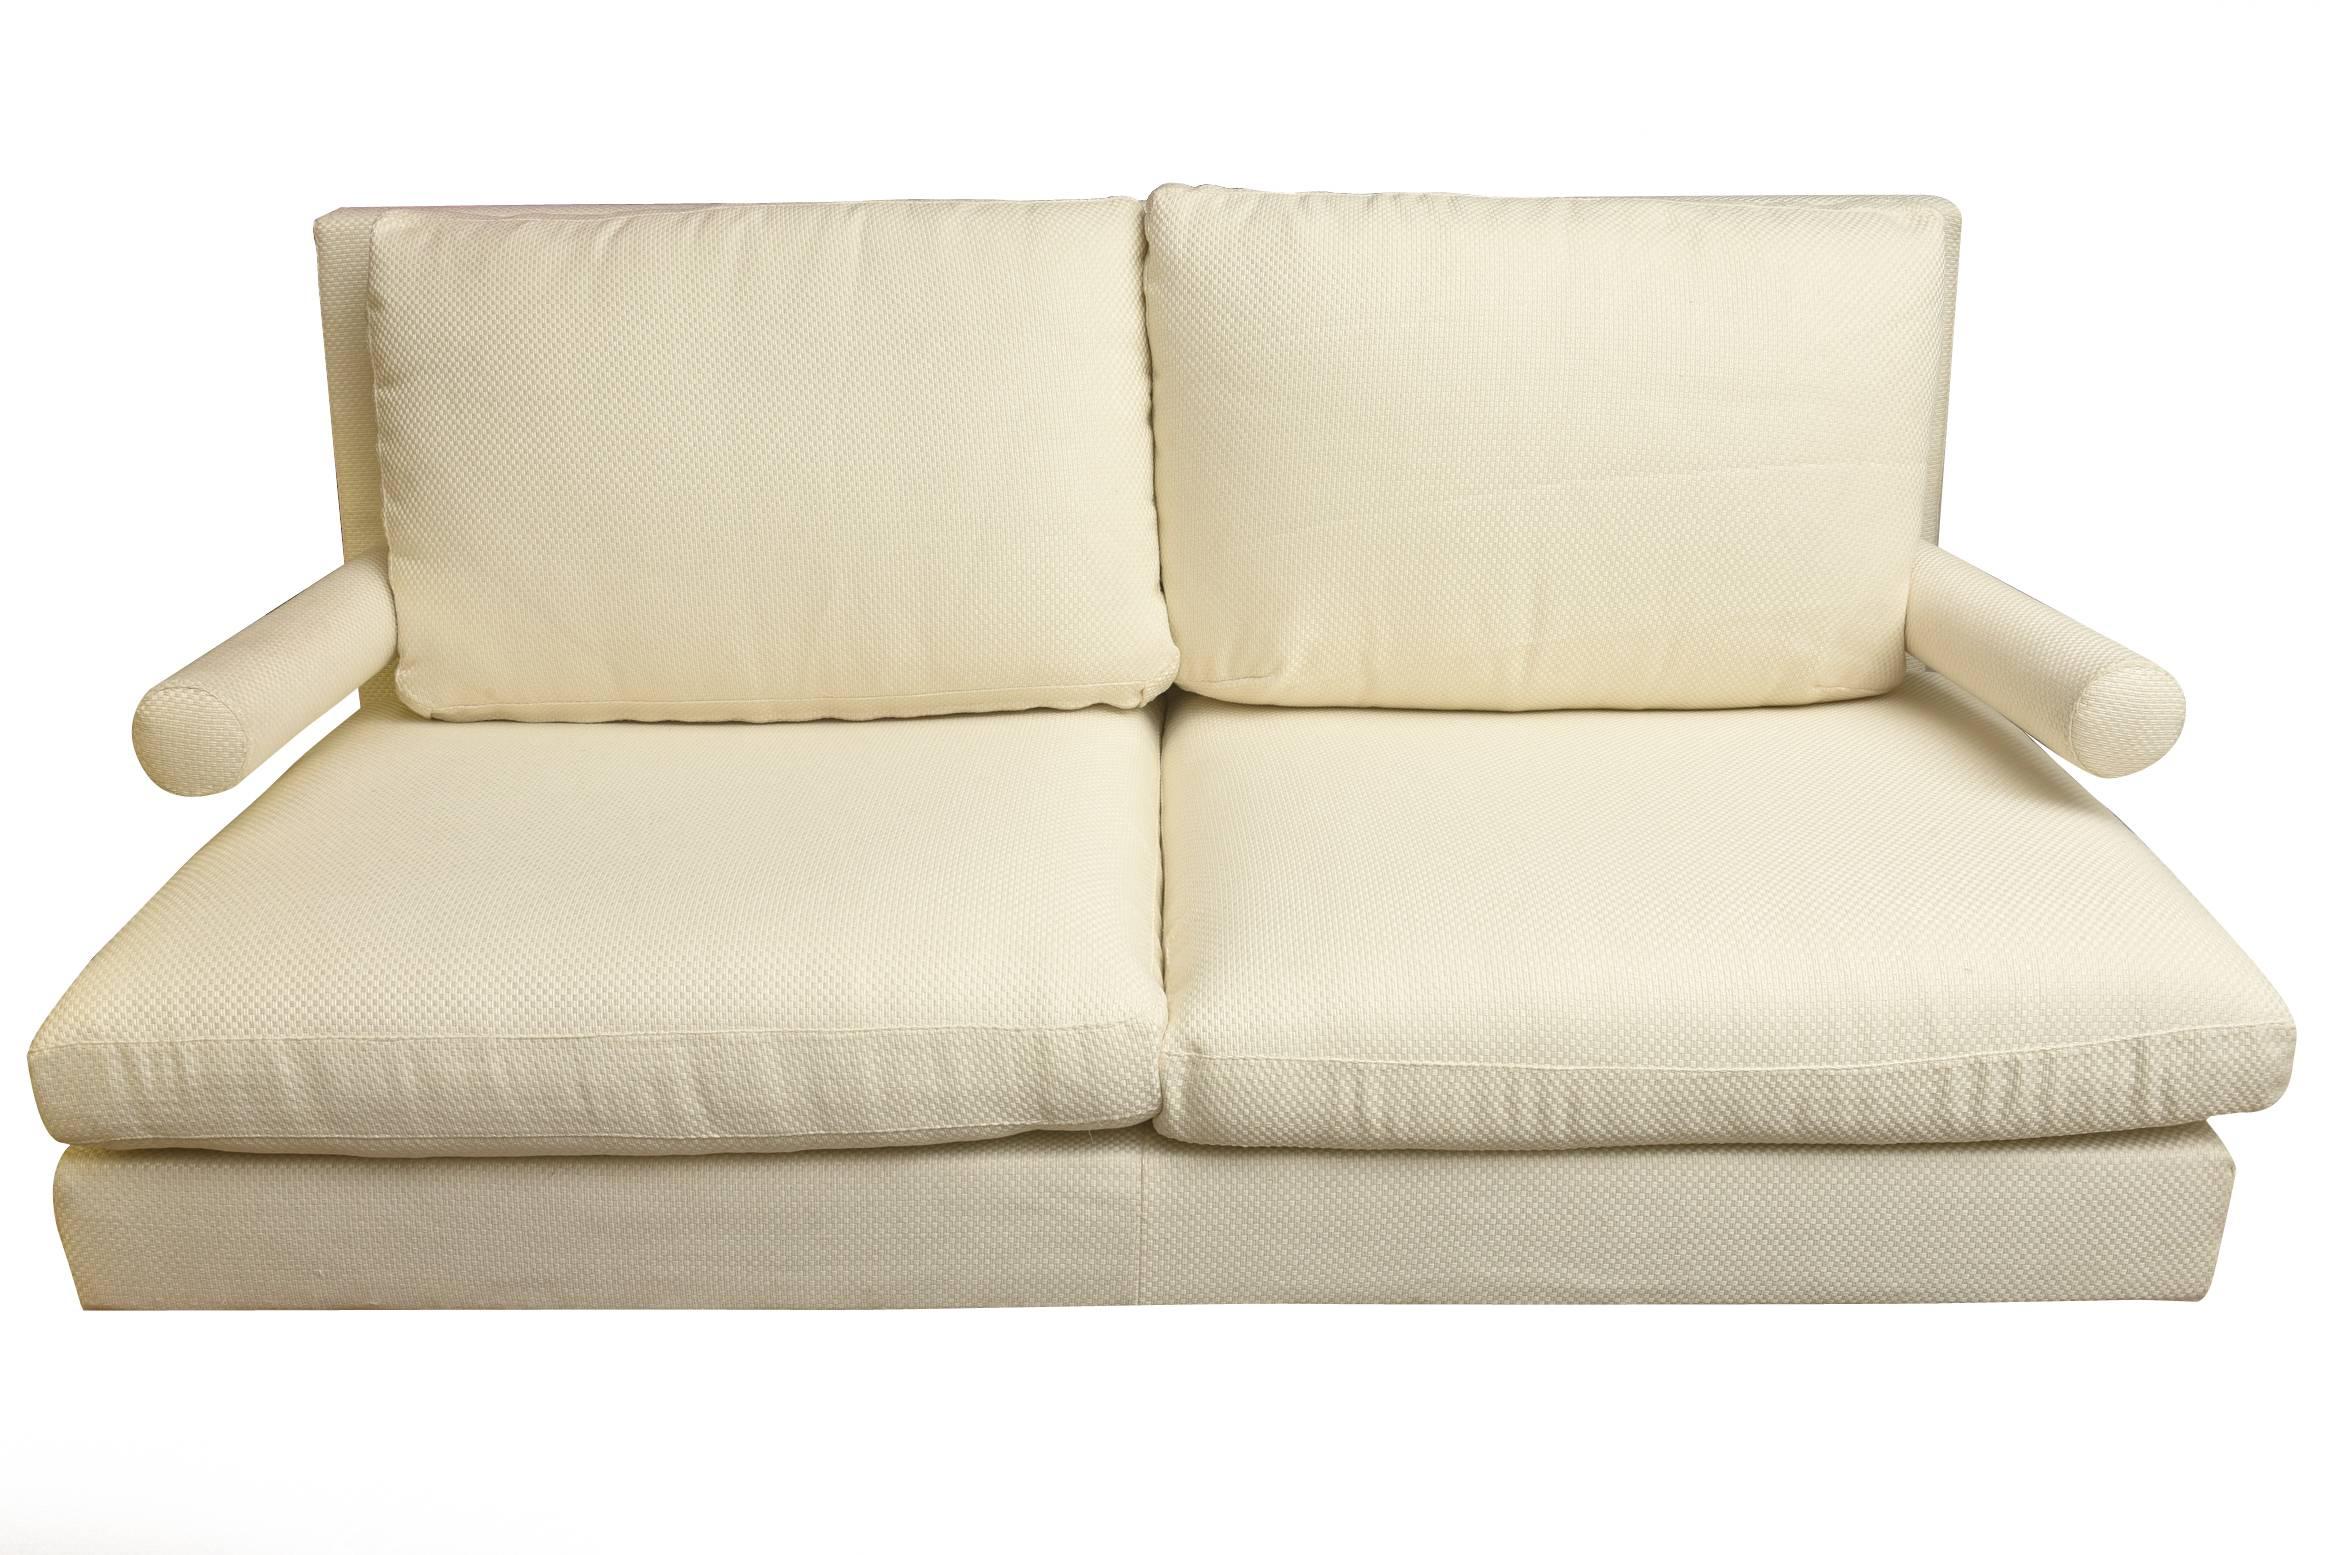 This newly upholstered Italian B&B sofa and or loveseat is from the 1980s. It is in an off-white textural checkerboard upholstery fabric. The sculptural arms add a dimension. It has black metal wheels on the front. It has substantial weight and is